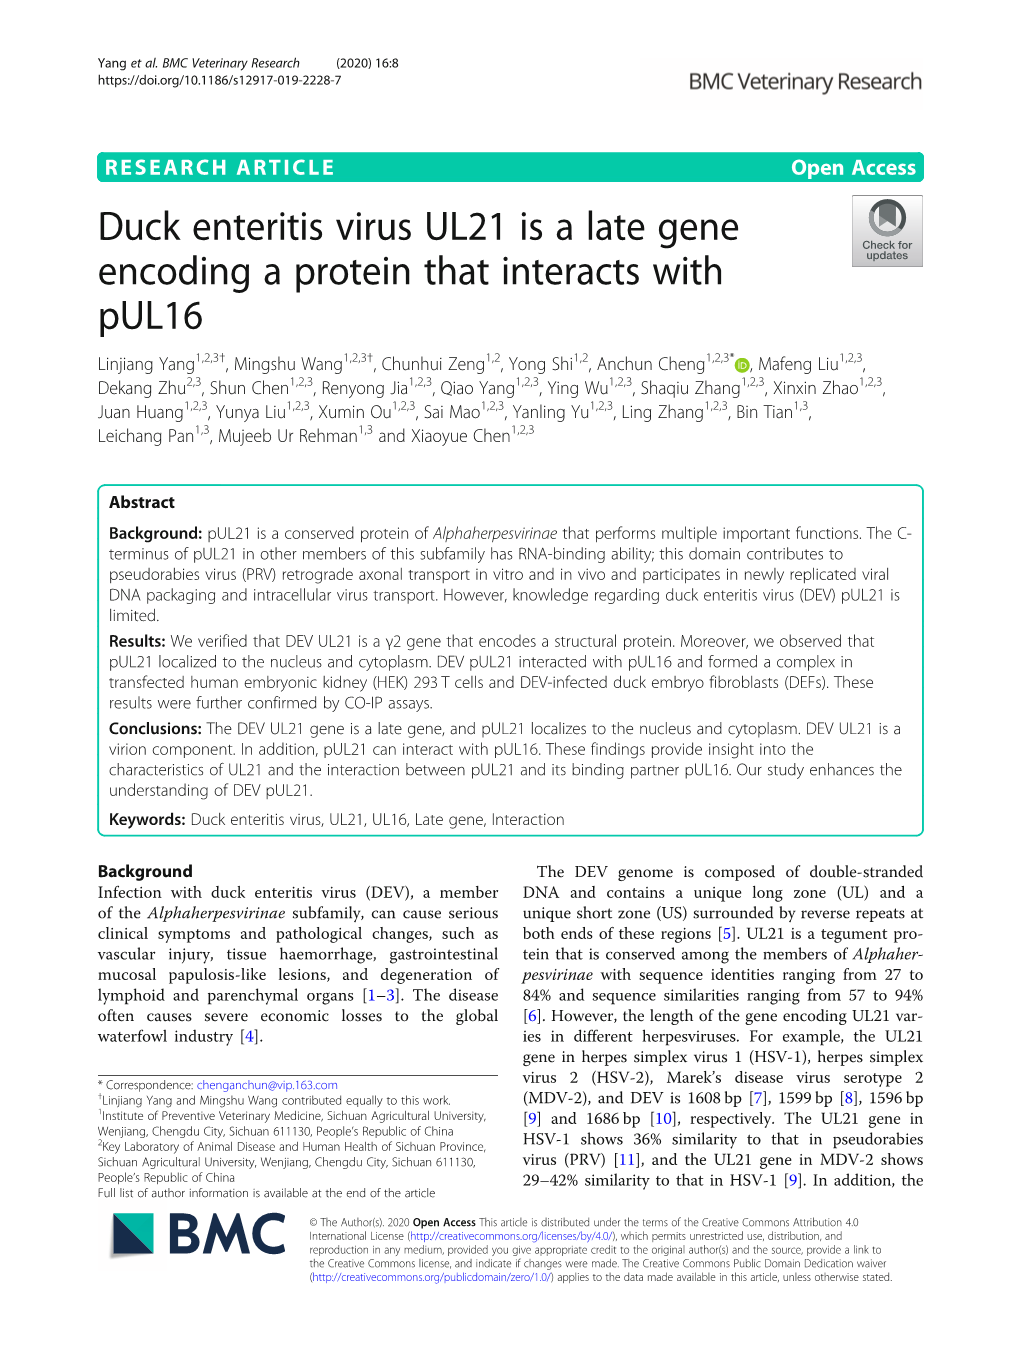 Duck Enteritis Virus UL21 Is a Late Gene Encoding a Protein That